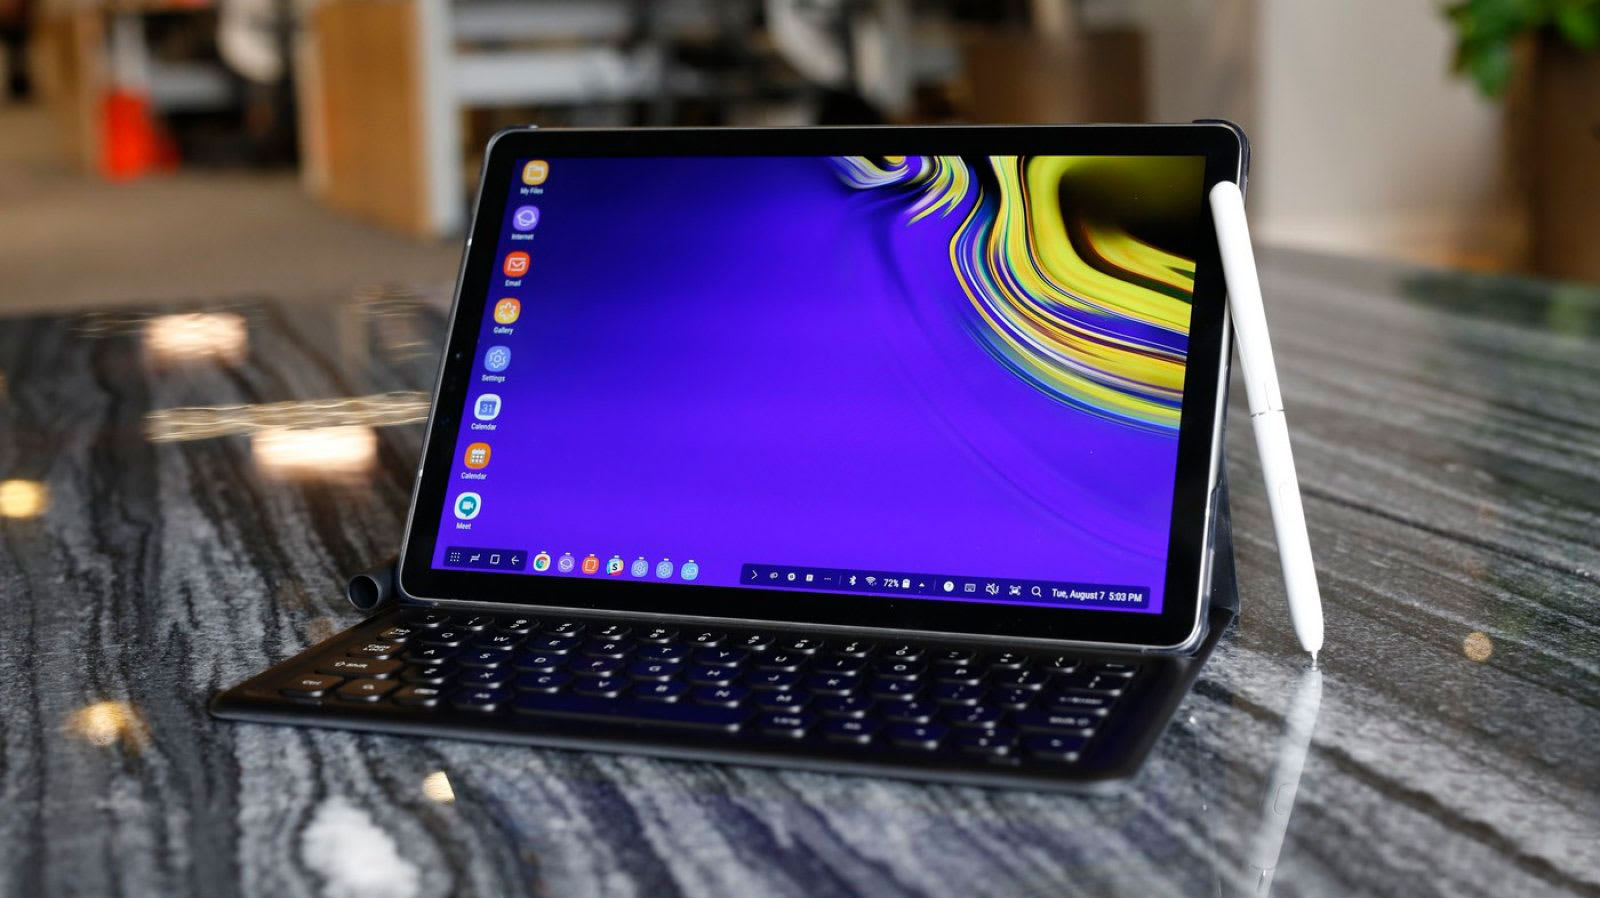 The Galaxy Tab S4 Is Built For Work But Gets Very Little Done